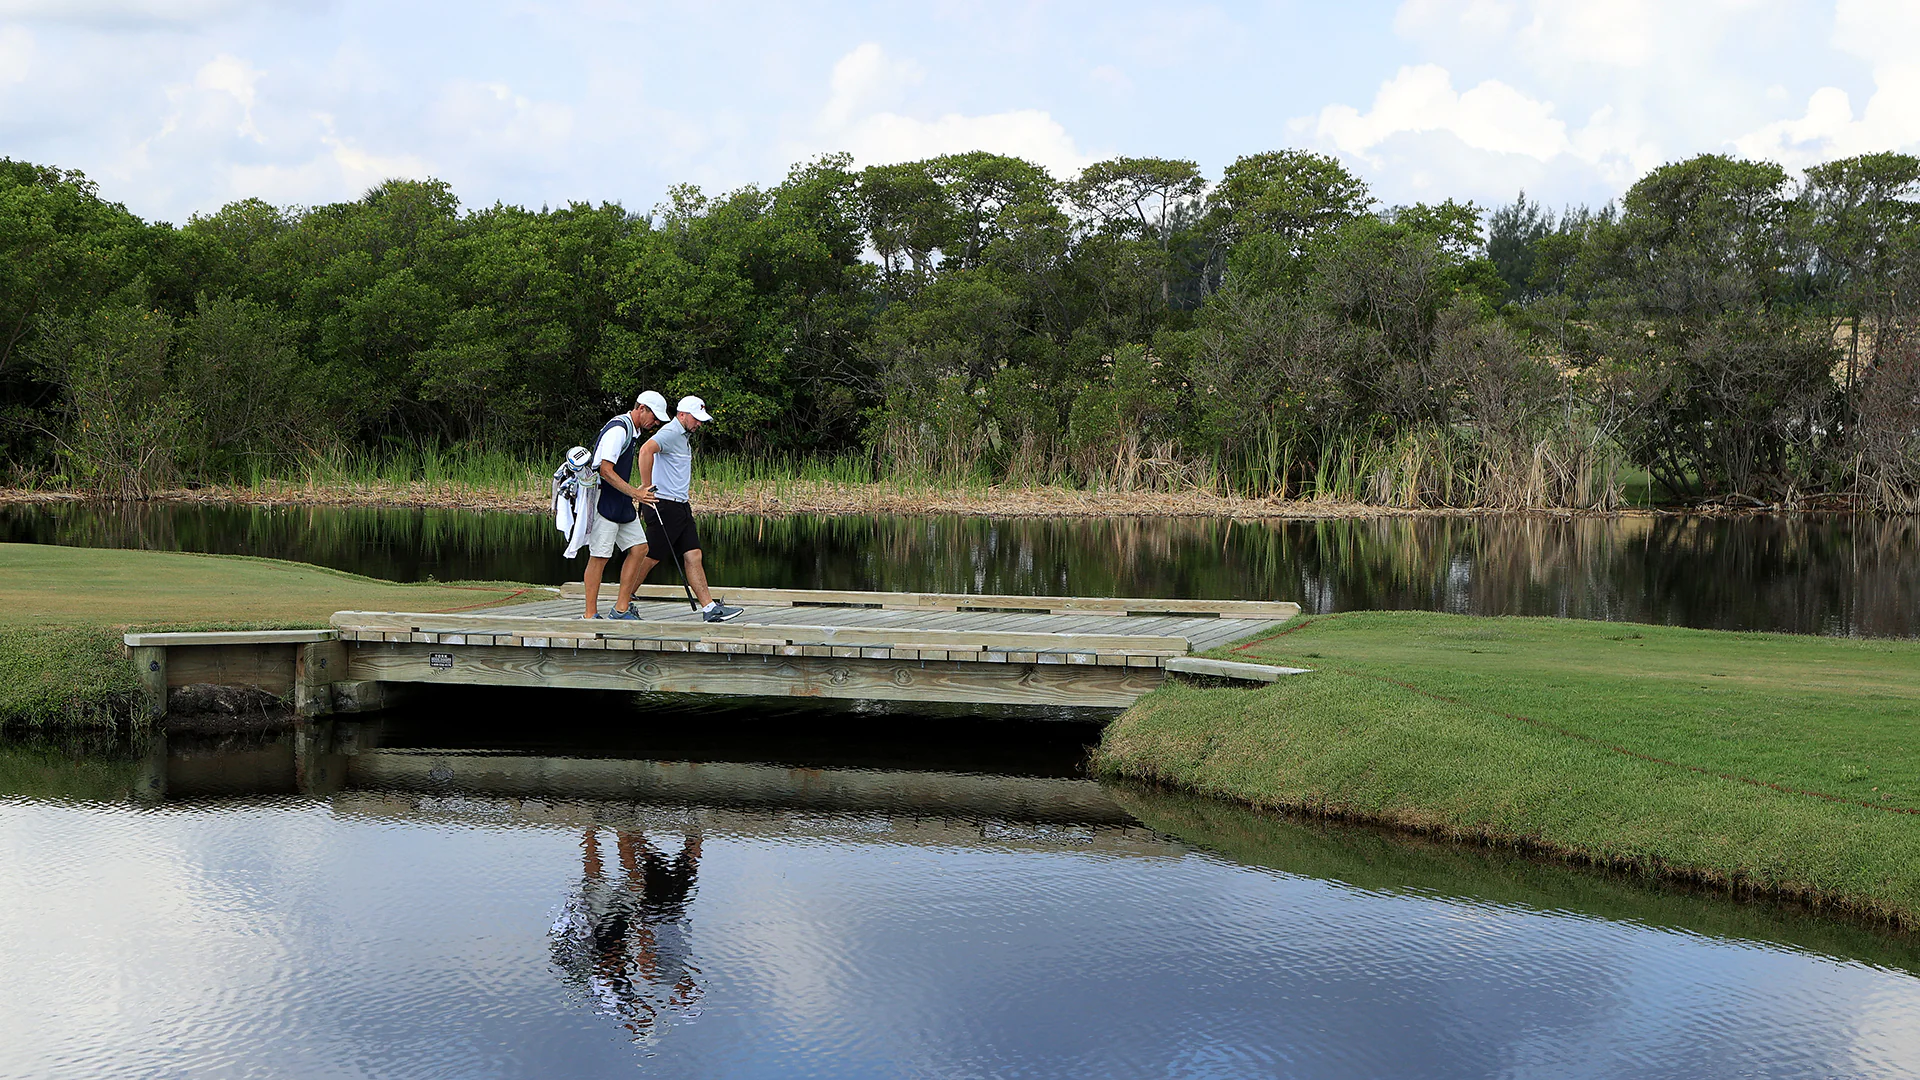 Notes from Thursday’s brief and rainy Walker Cup practice at Seminole